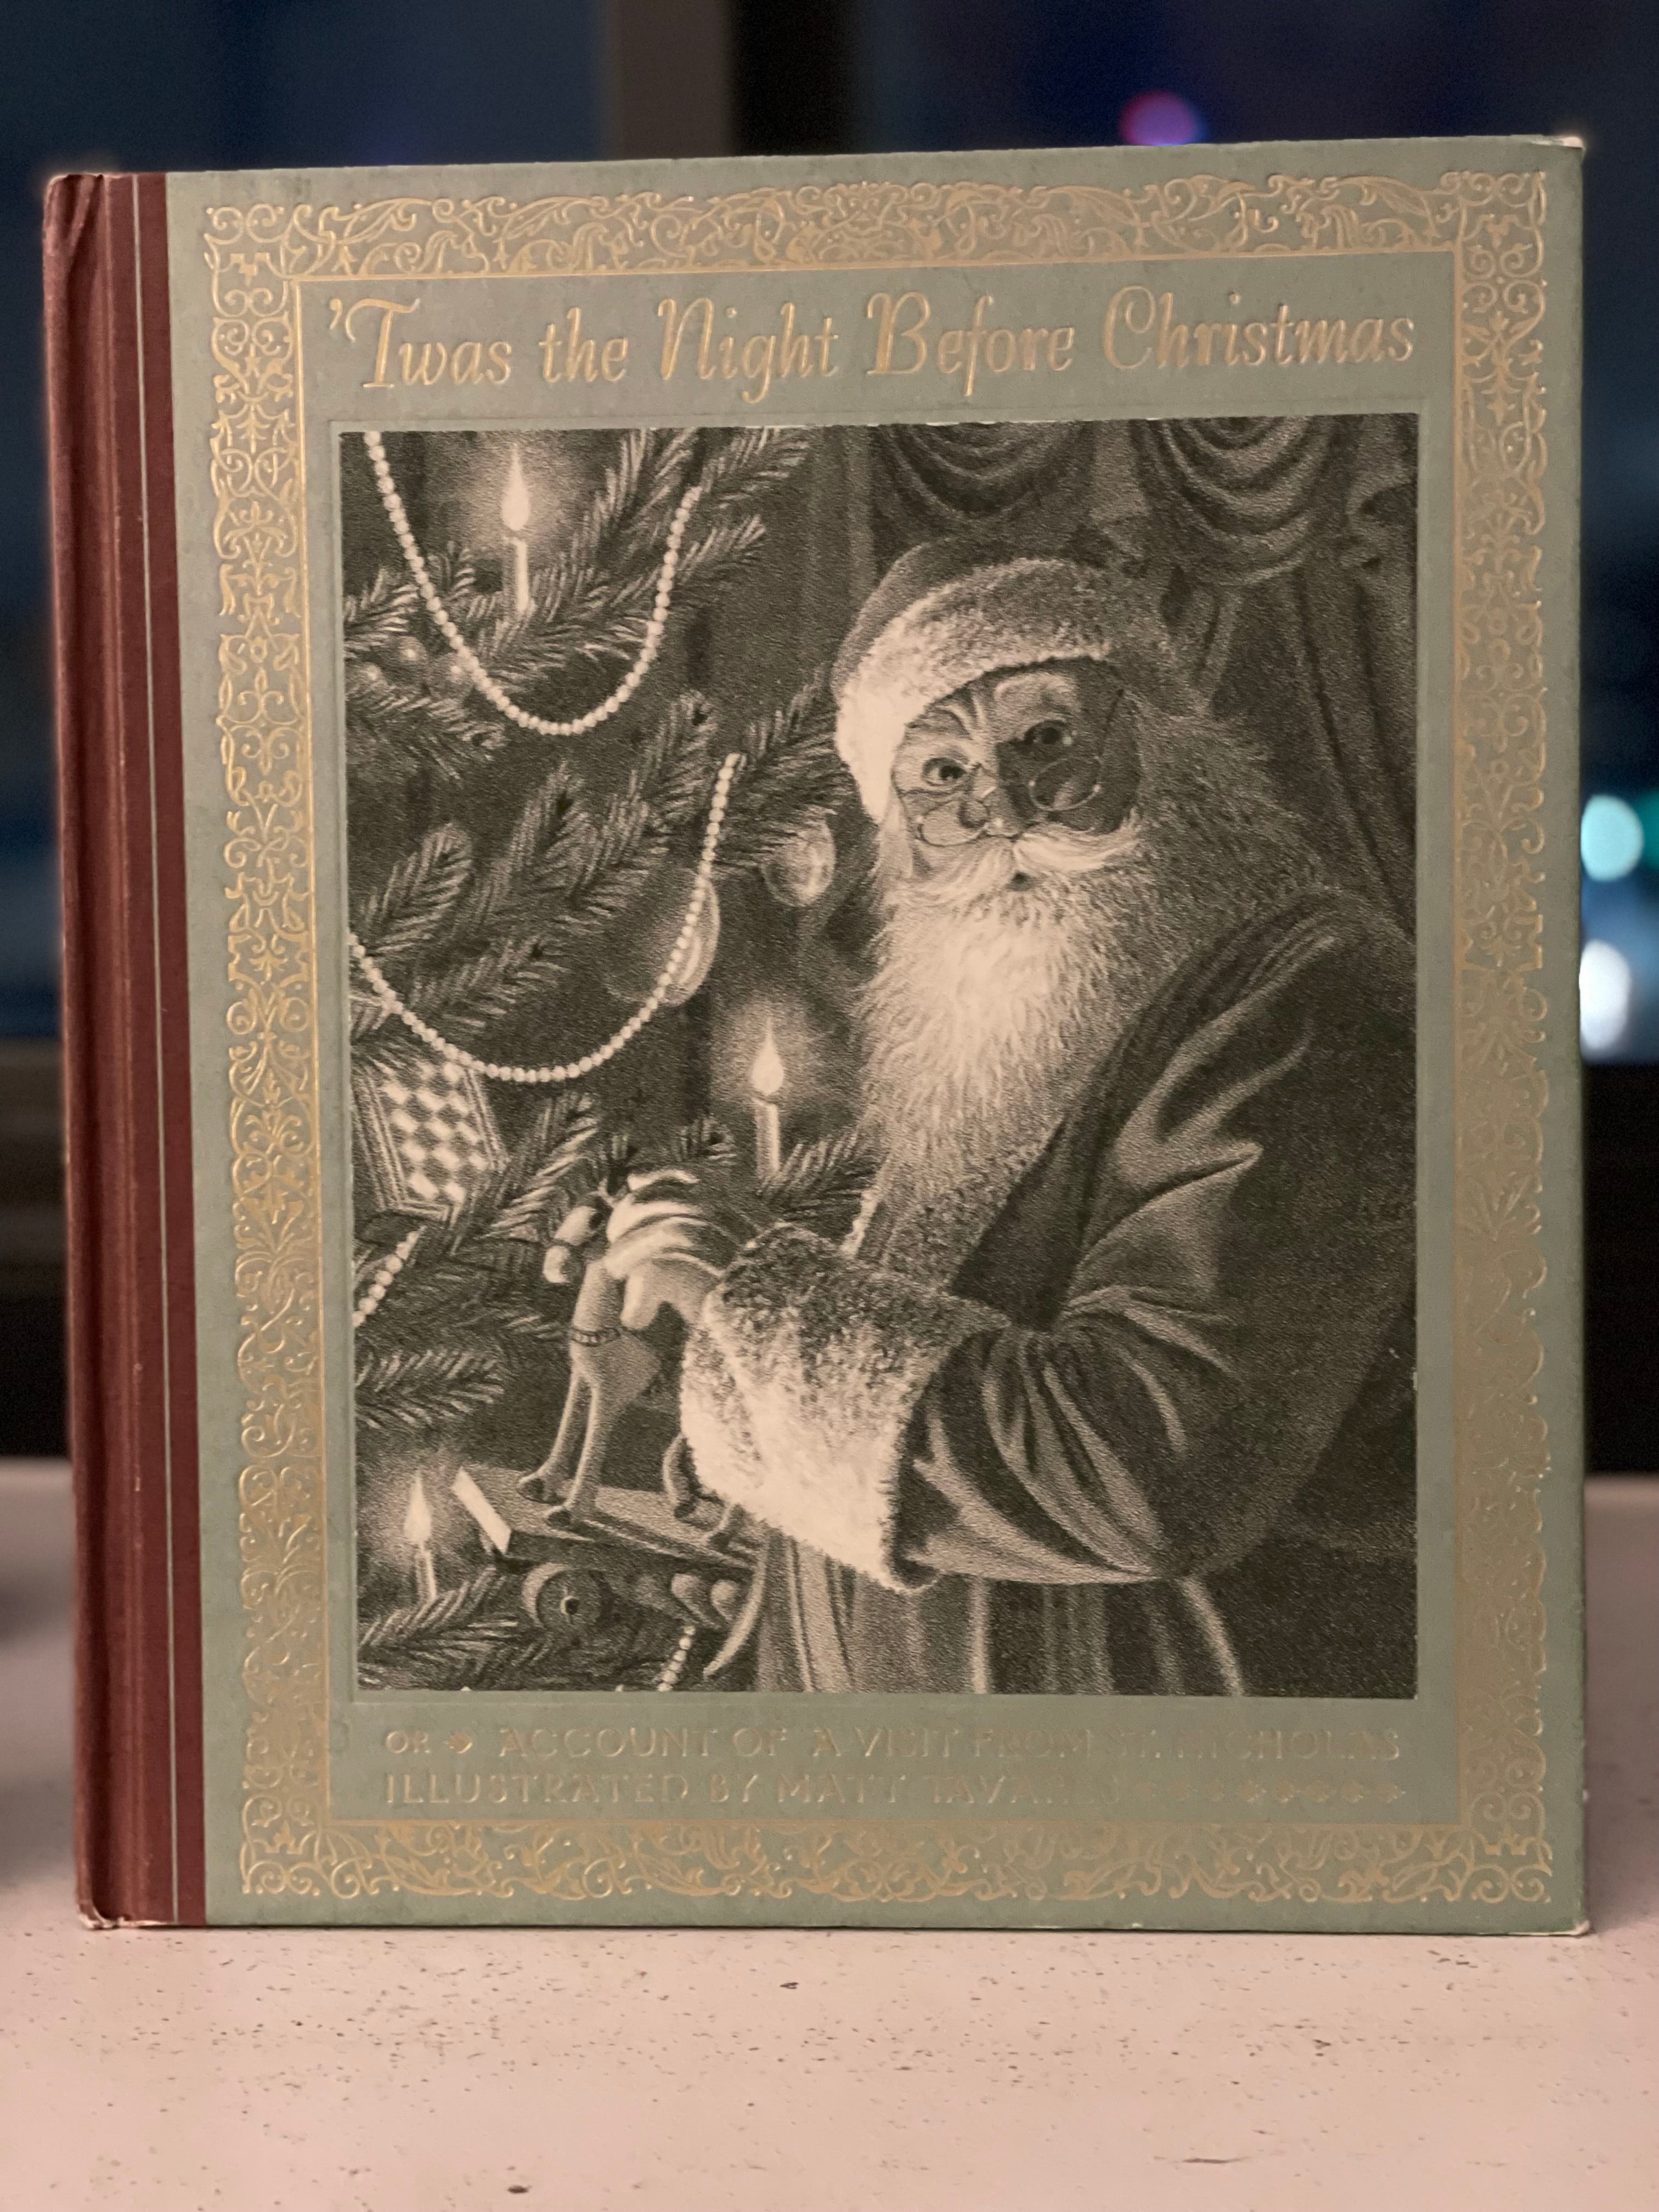 The cover of "'Twas the Night Before Christmas"